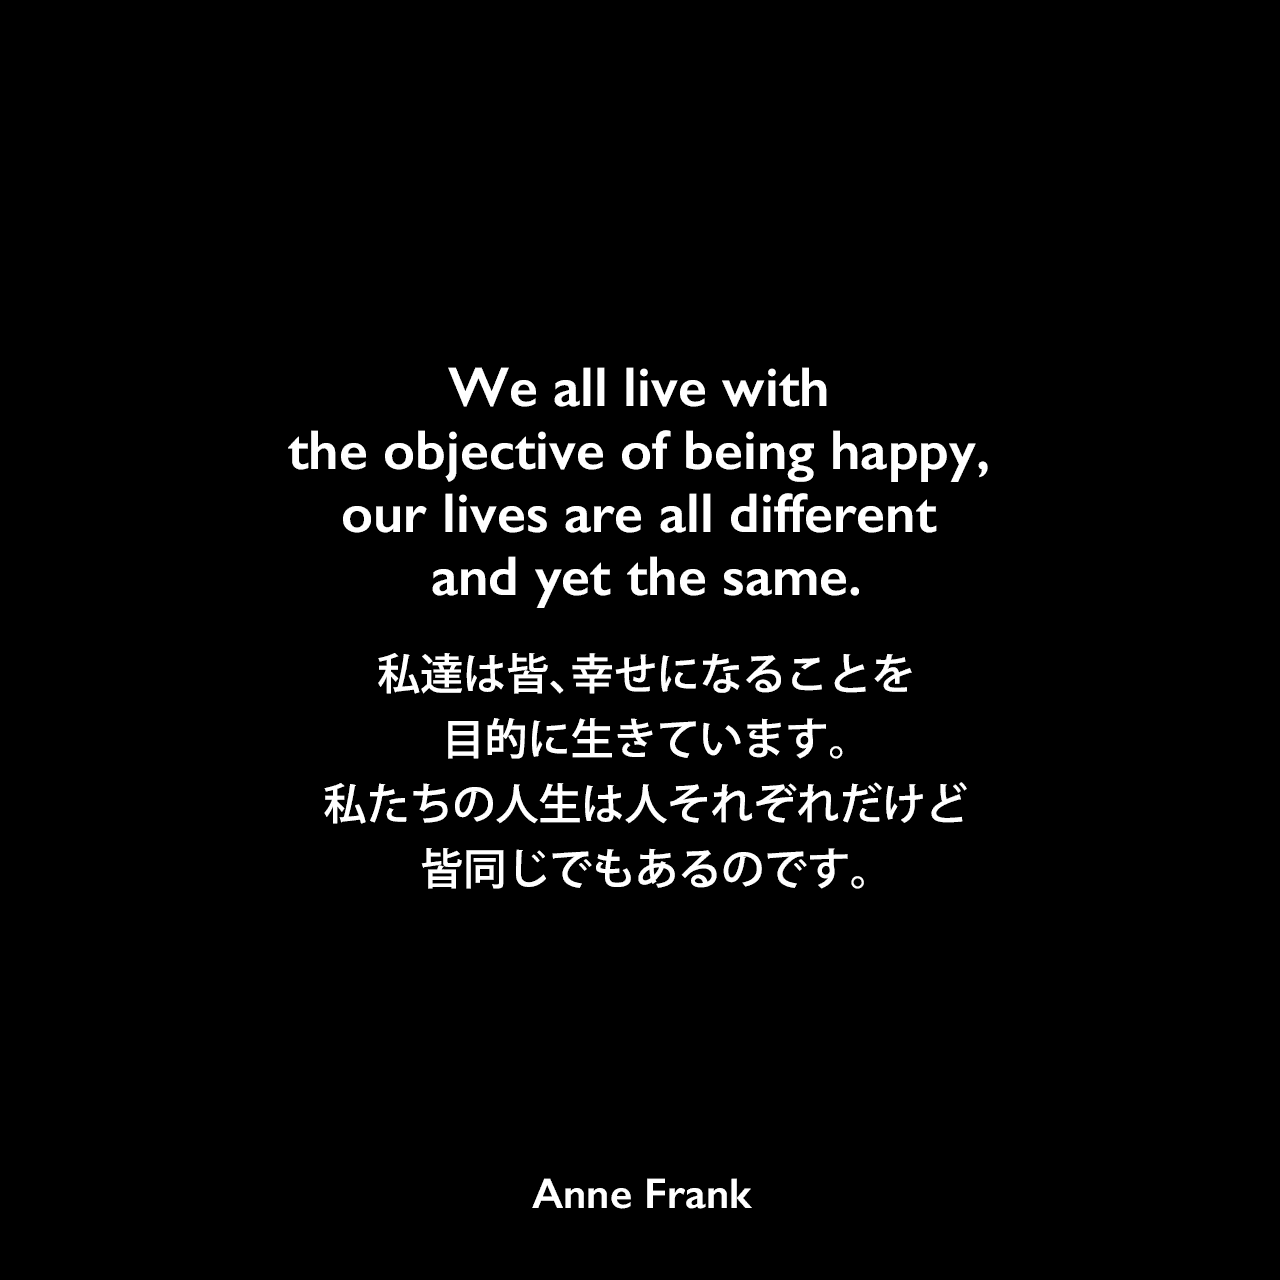 We all live with the objective of being happy, our lives are all different and yet the same.私達は皆、幸せになることを目的に生きています。私たちの人生は人それぞれだけど、皆同じでもあるのです。- 「アンネの日記」よりAnne Frank